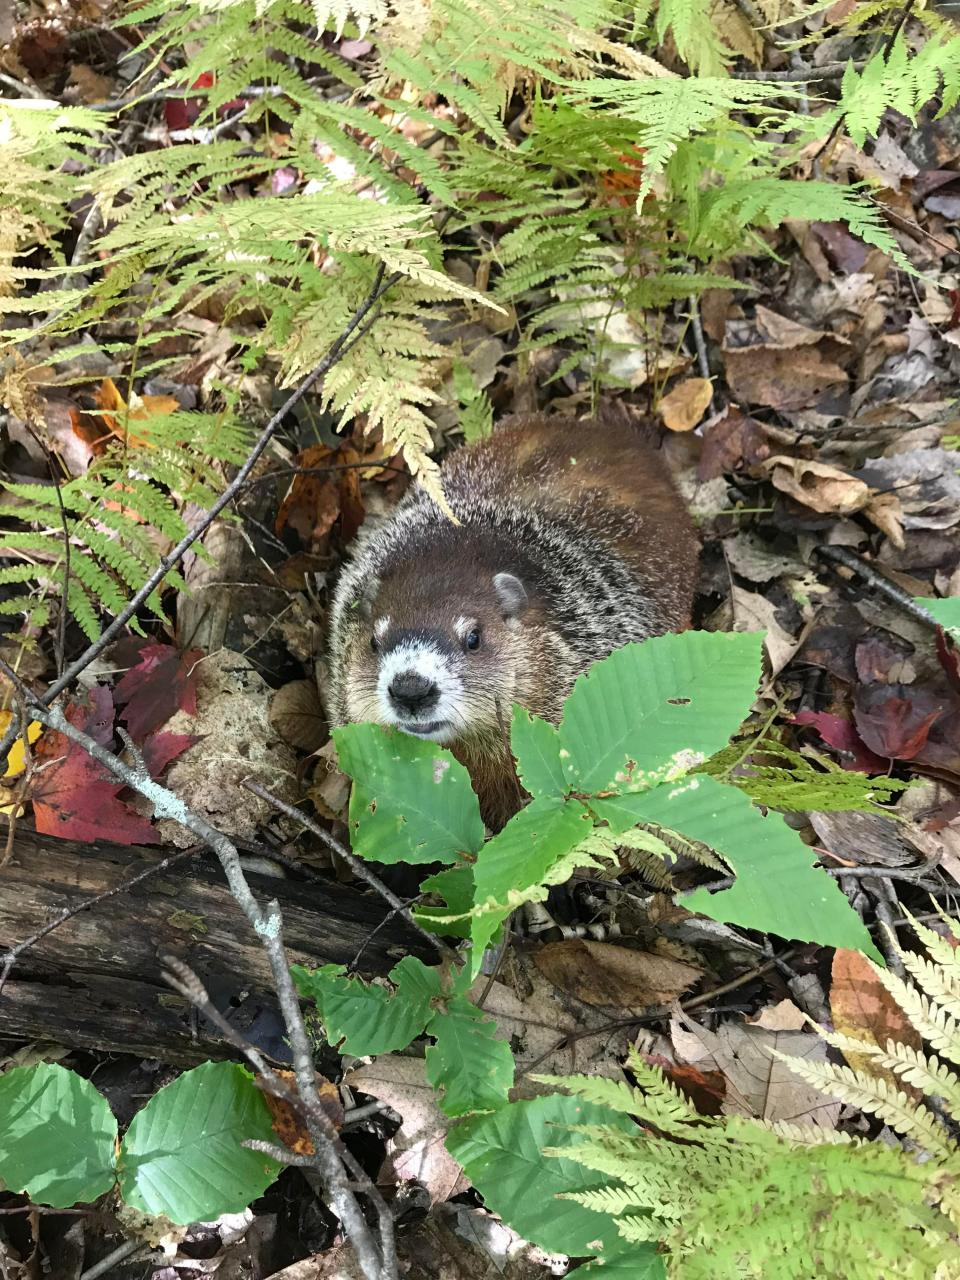 Kathi McCue, a wildlife rehabber in Bowdoin, Maine, recently saw a groundhog emerge from hibernation due to the unusually warm winter temperatures.